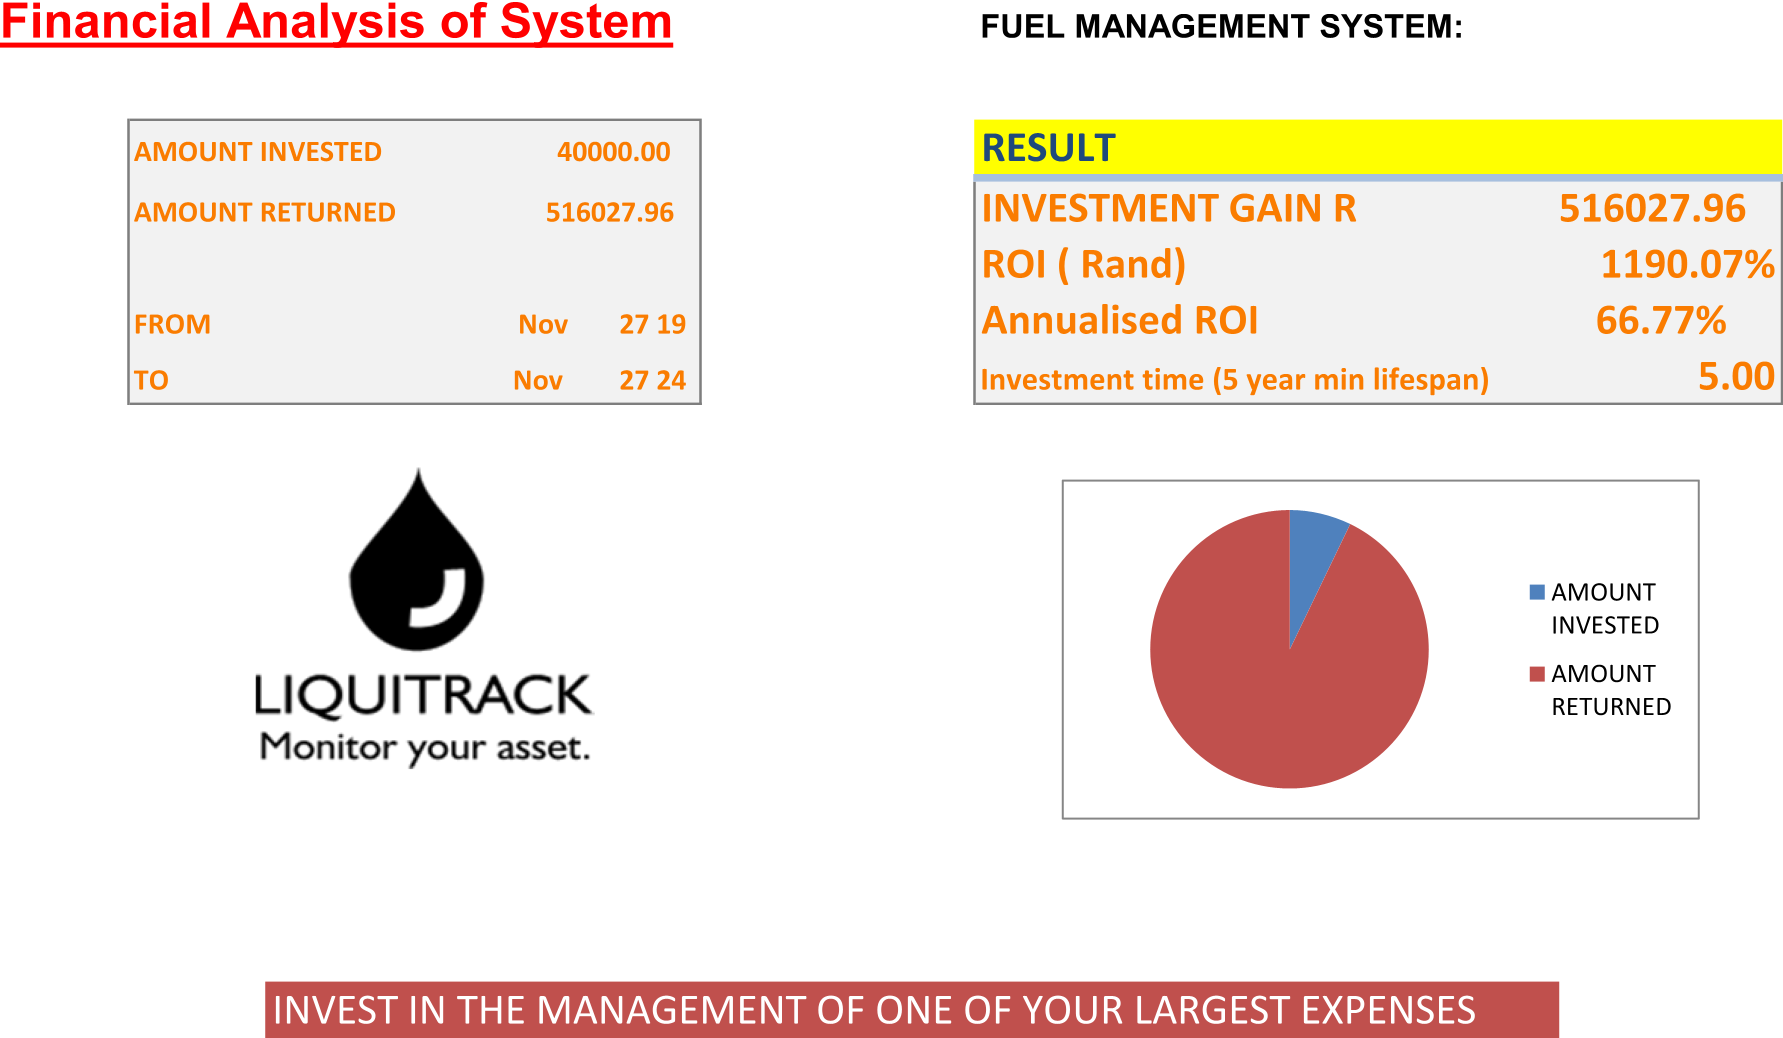 Return on Investment culculation showing benefits of Liquitrack Fuel Management system over time.